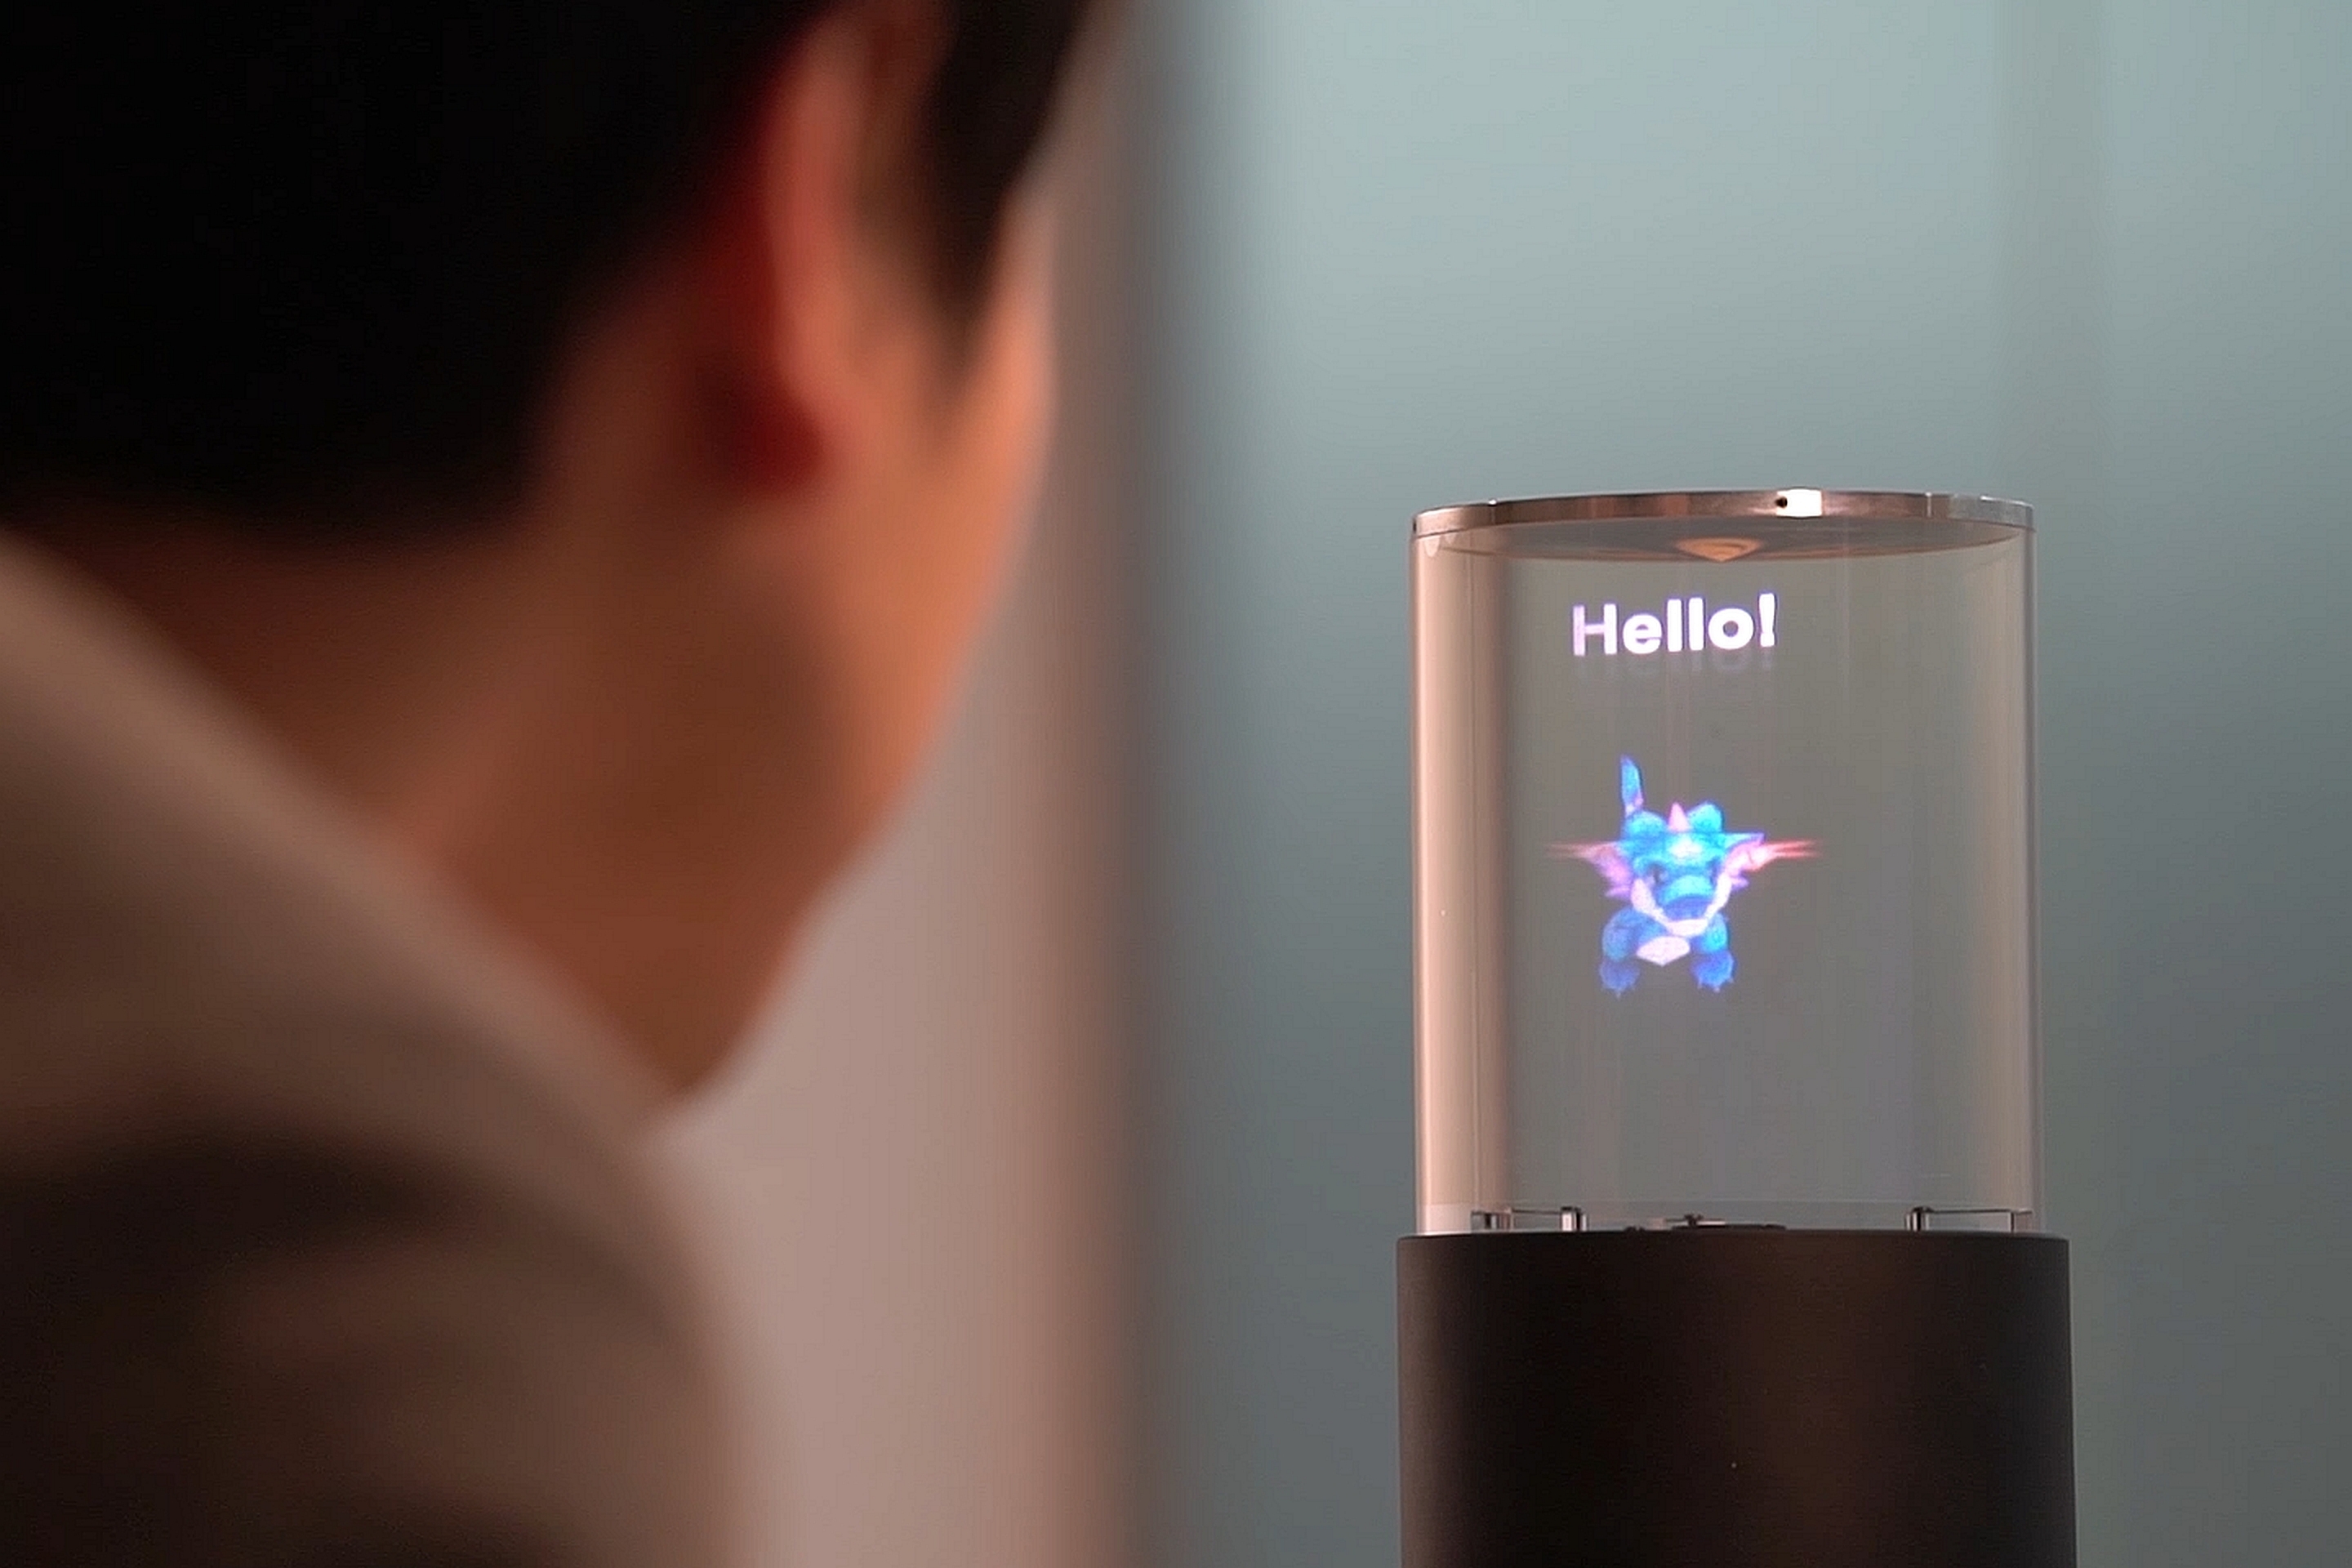 Are Holographic 2D Images the Future of In-home AI?